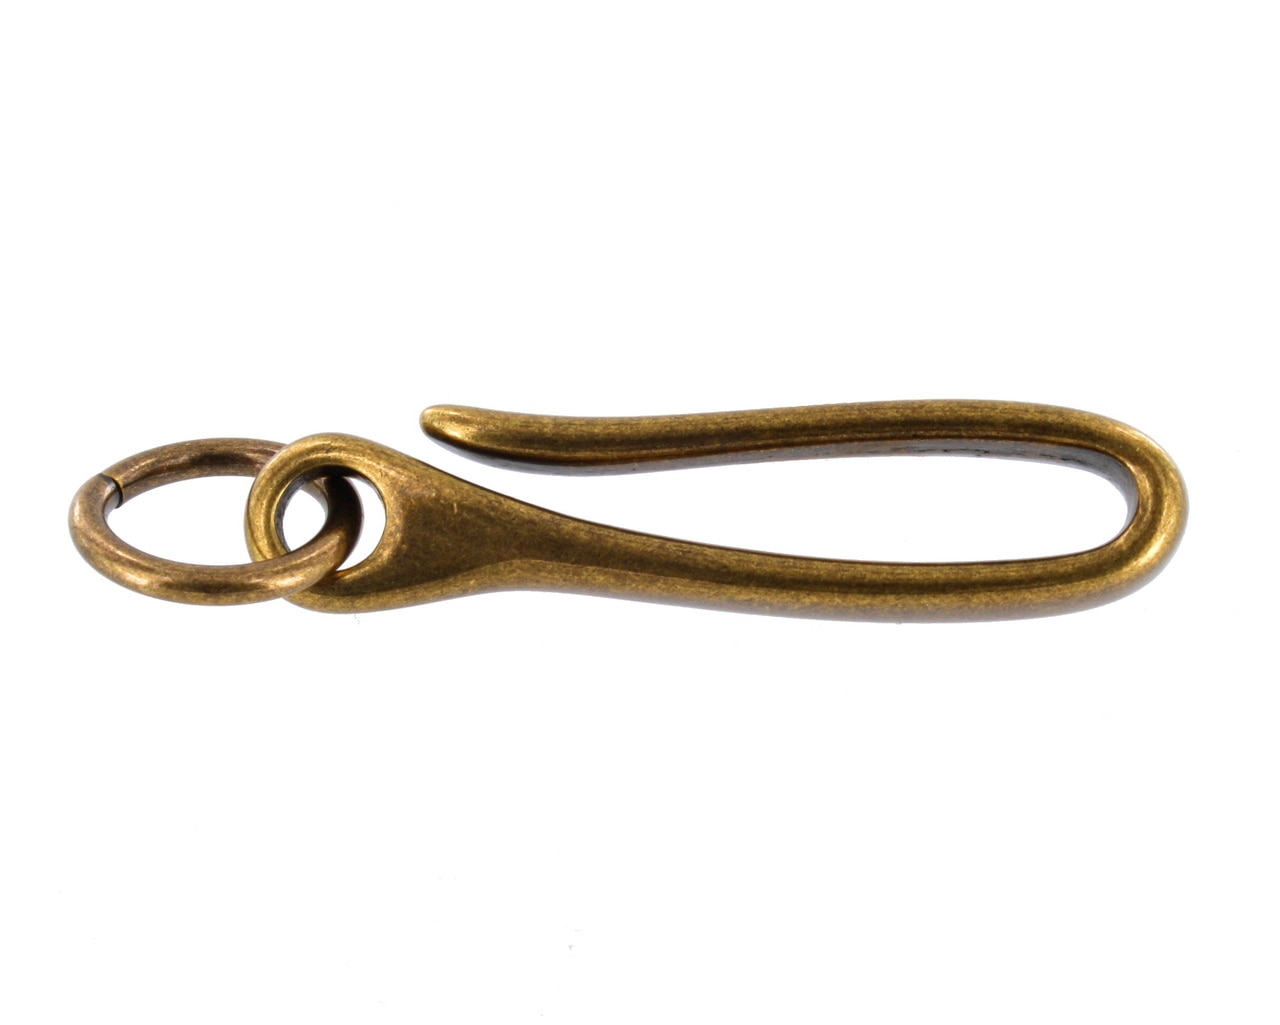 Kyoshin Elle - Japanese Brass Fish Hook Key Chain / Jump Ring and